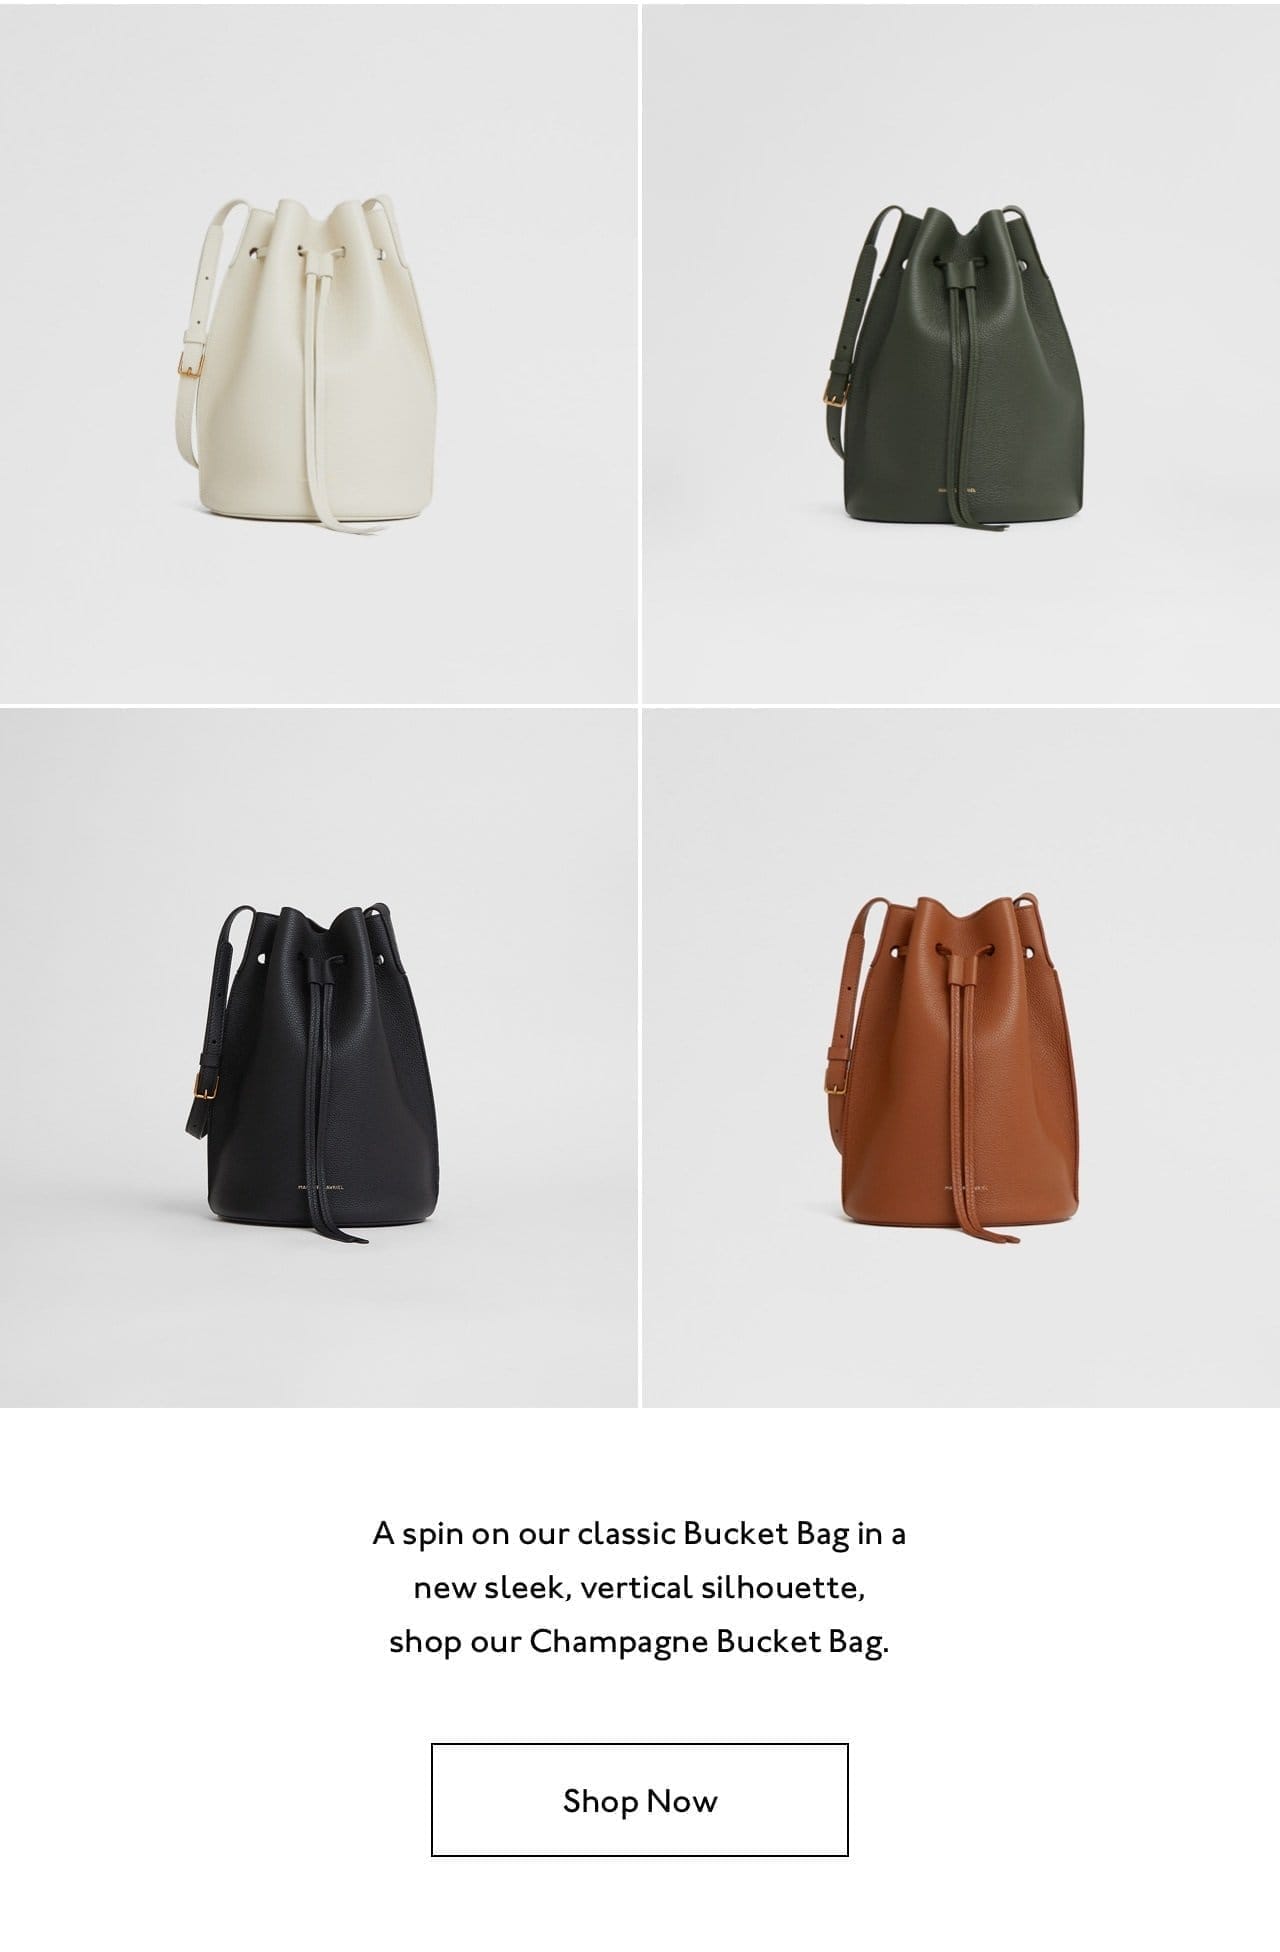 A spin on our clsasic Bucket Bag in a new sleek, vertical silhouette, shop our Champagne Bucket Bag.